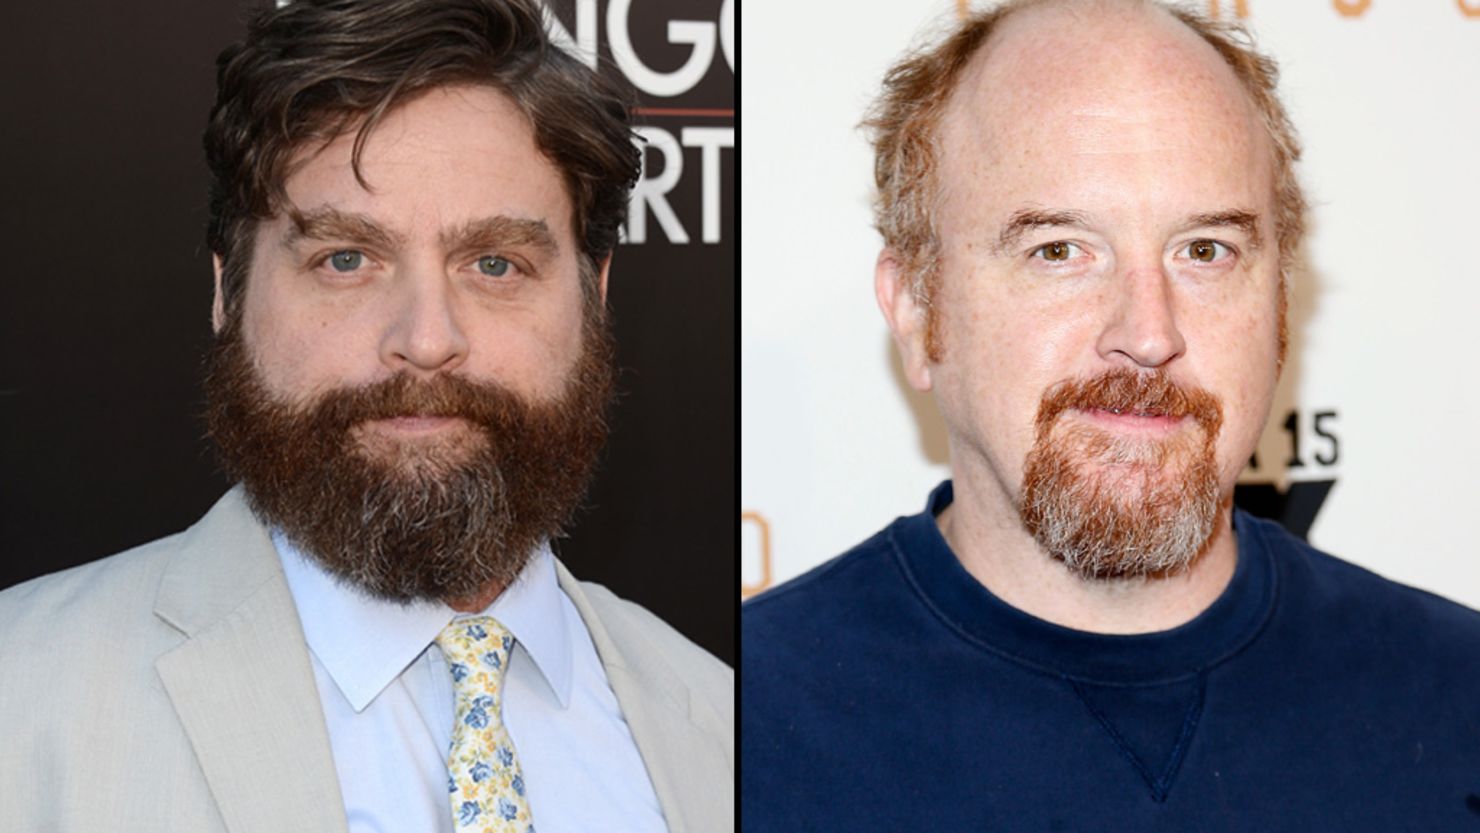 Zach Galifianakis and Louis C.K. have teamed up for a new FX comedy about a man's dream to become a pro clown.